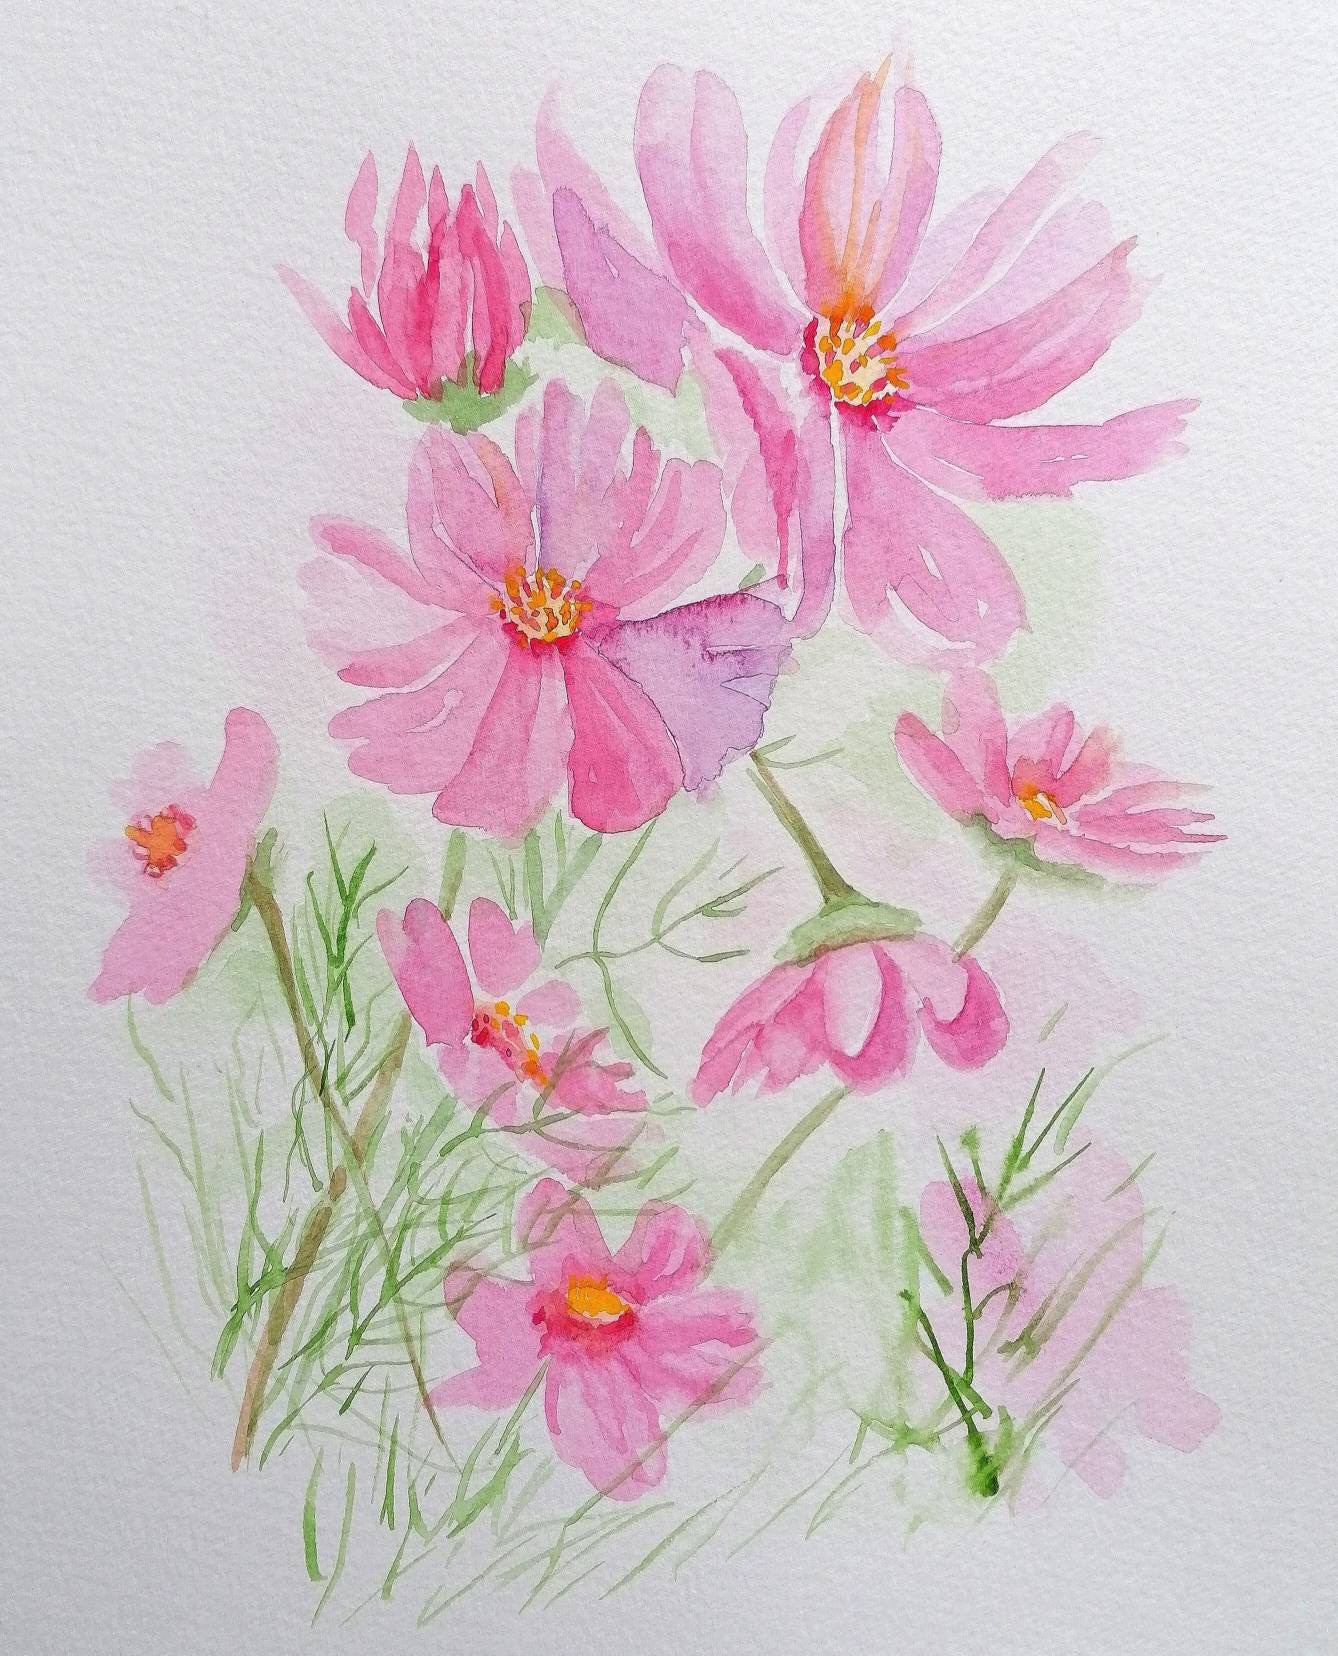 COSMOS BLOOMS Flower Watercolour Original Painting by | Etsy